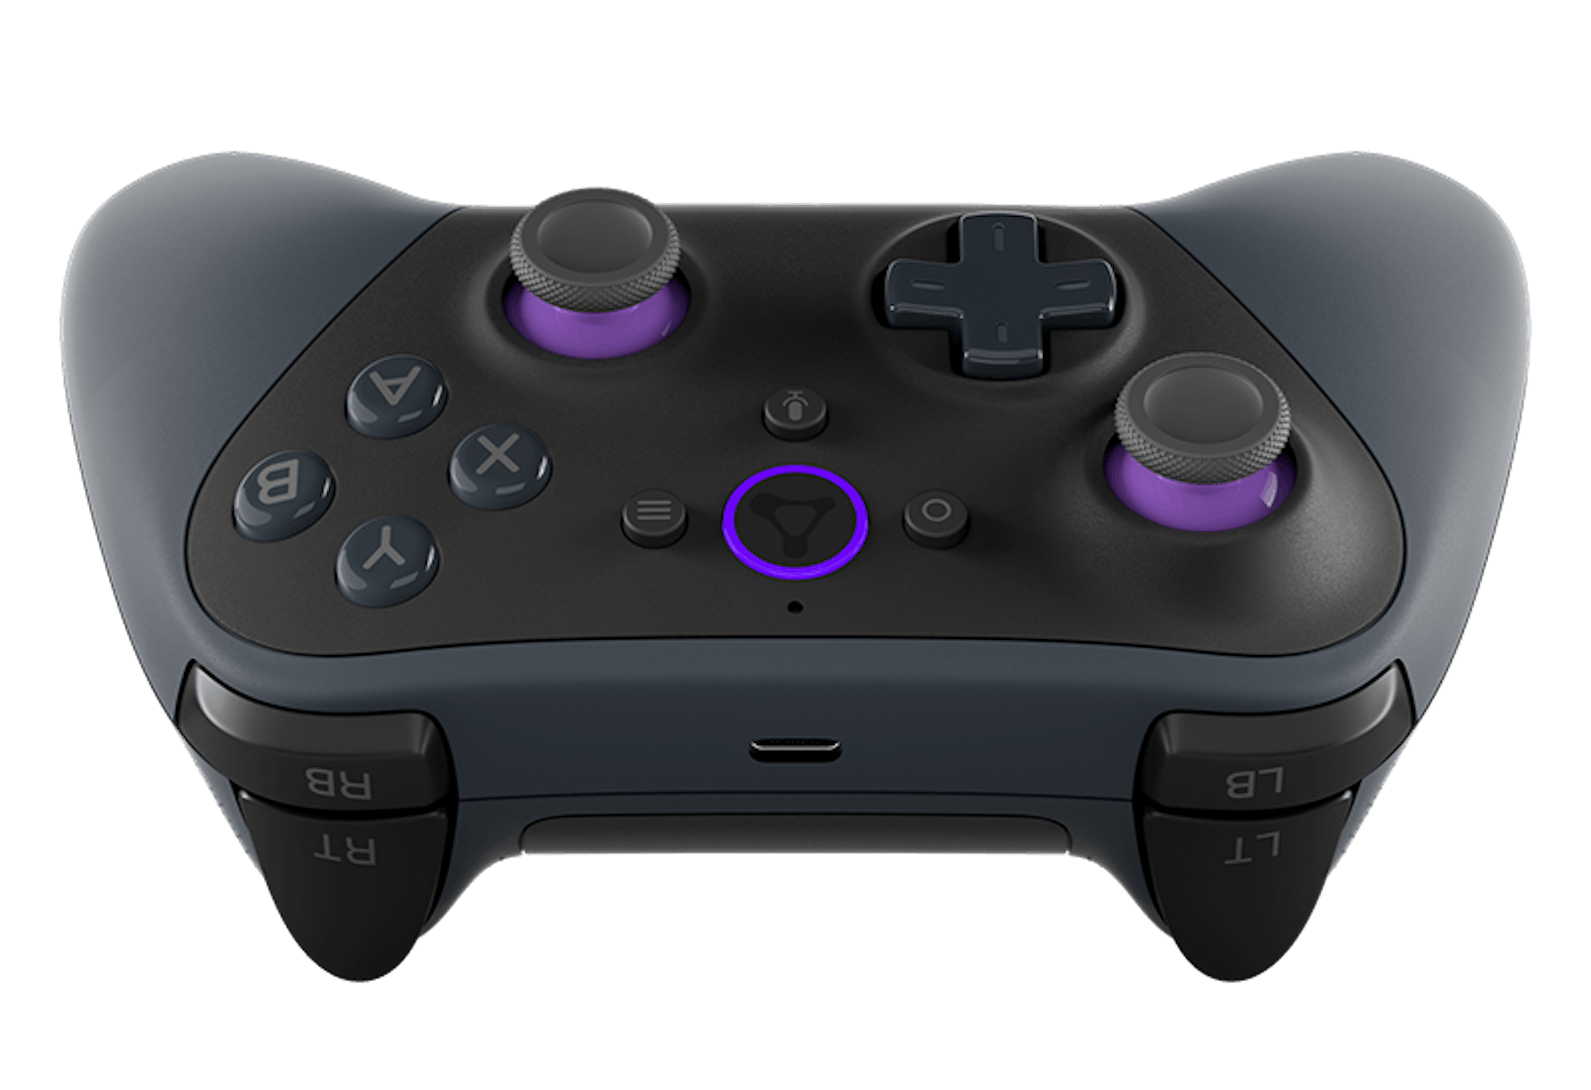 Hacked Xbox Controllerbluetooth Gamepad For Iphone - Sony Playstation  Compatible, Party Mode